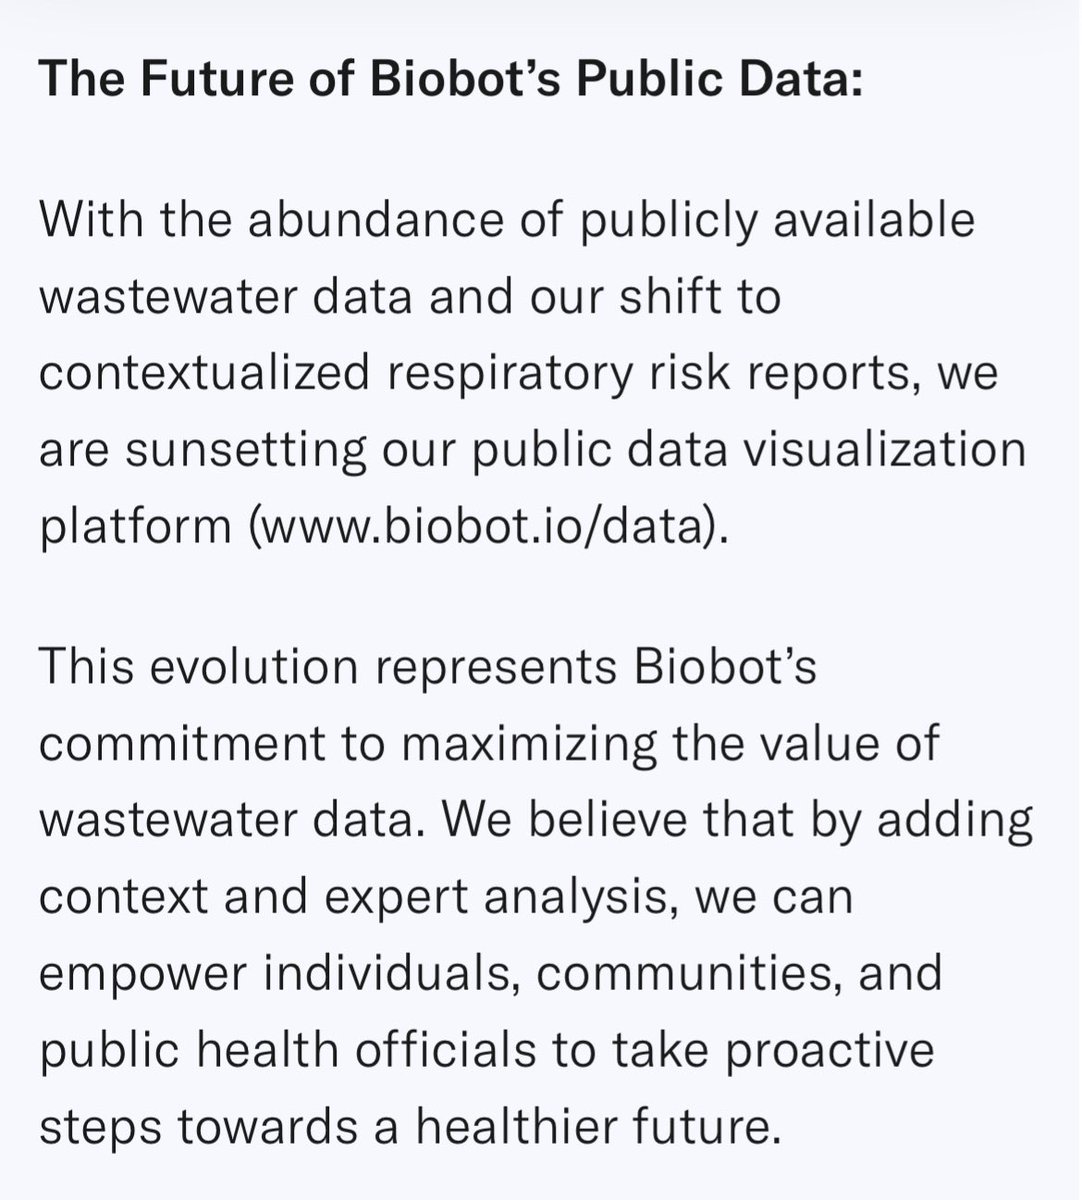 News: Biobot is sunsetting its COVID-19 wastewater public data visualization platform. While Biobot will continue to publish their contextualized weekly respiratory risk reports, this represents another decrease in data transparency, and a step in the wrong direction.